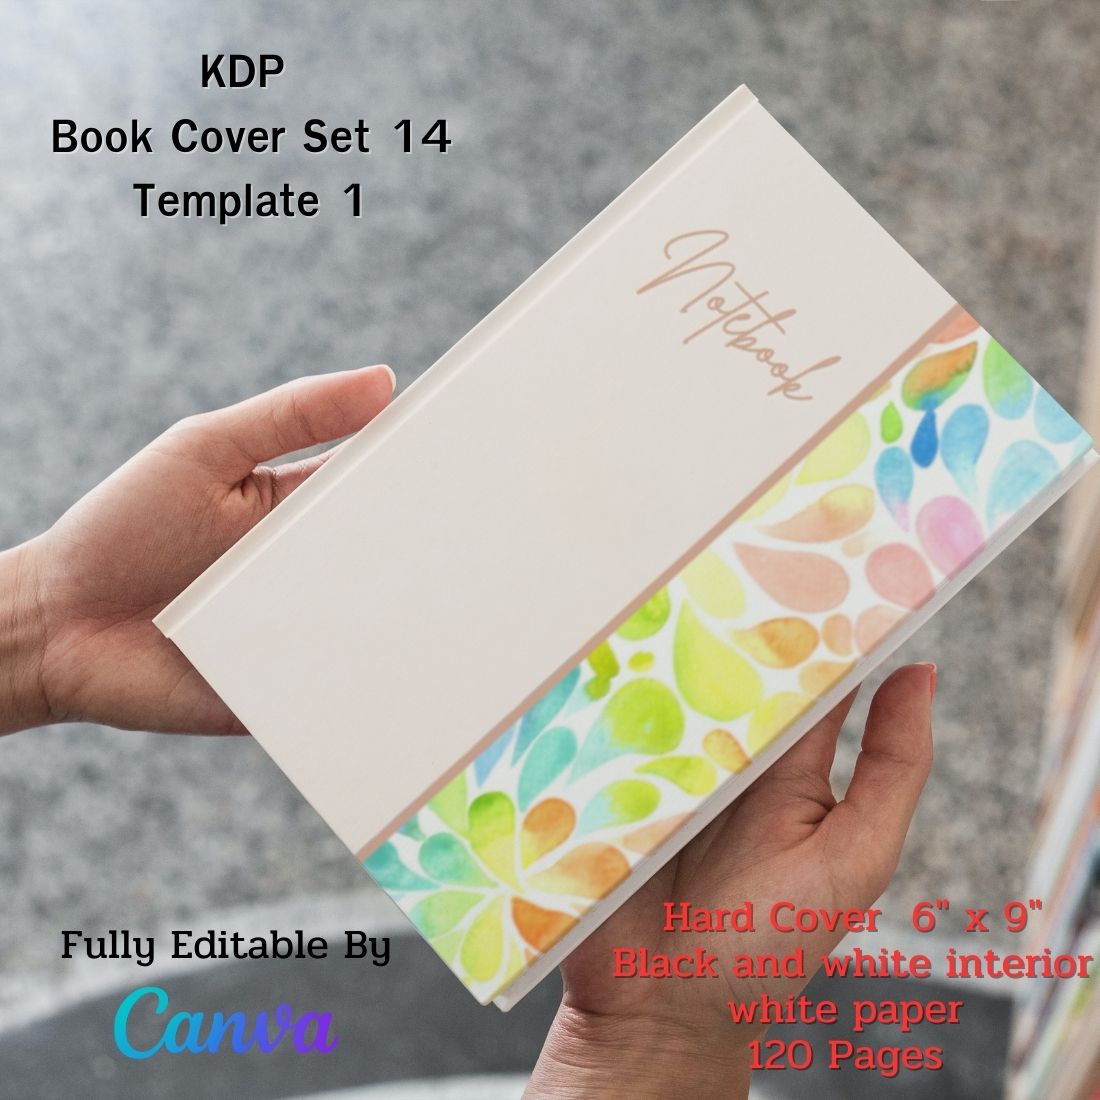 KDP Book Cover Set #14 Canva Template - Hard Cover preview image.